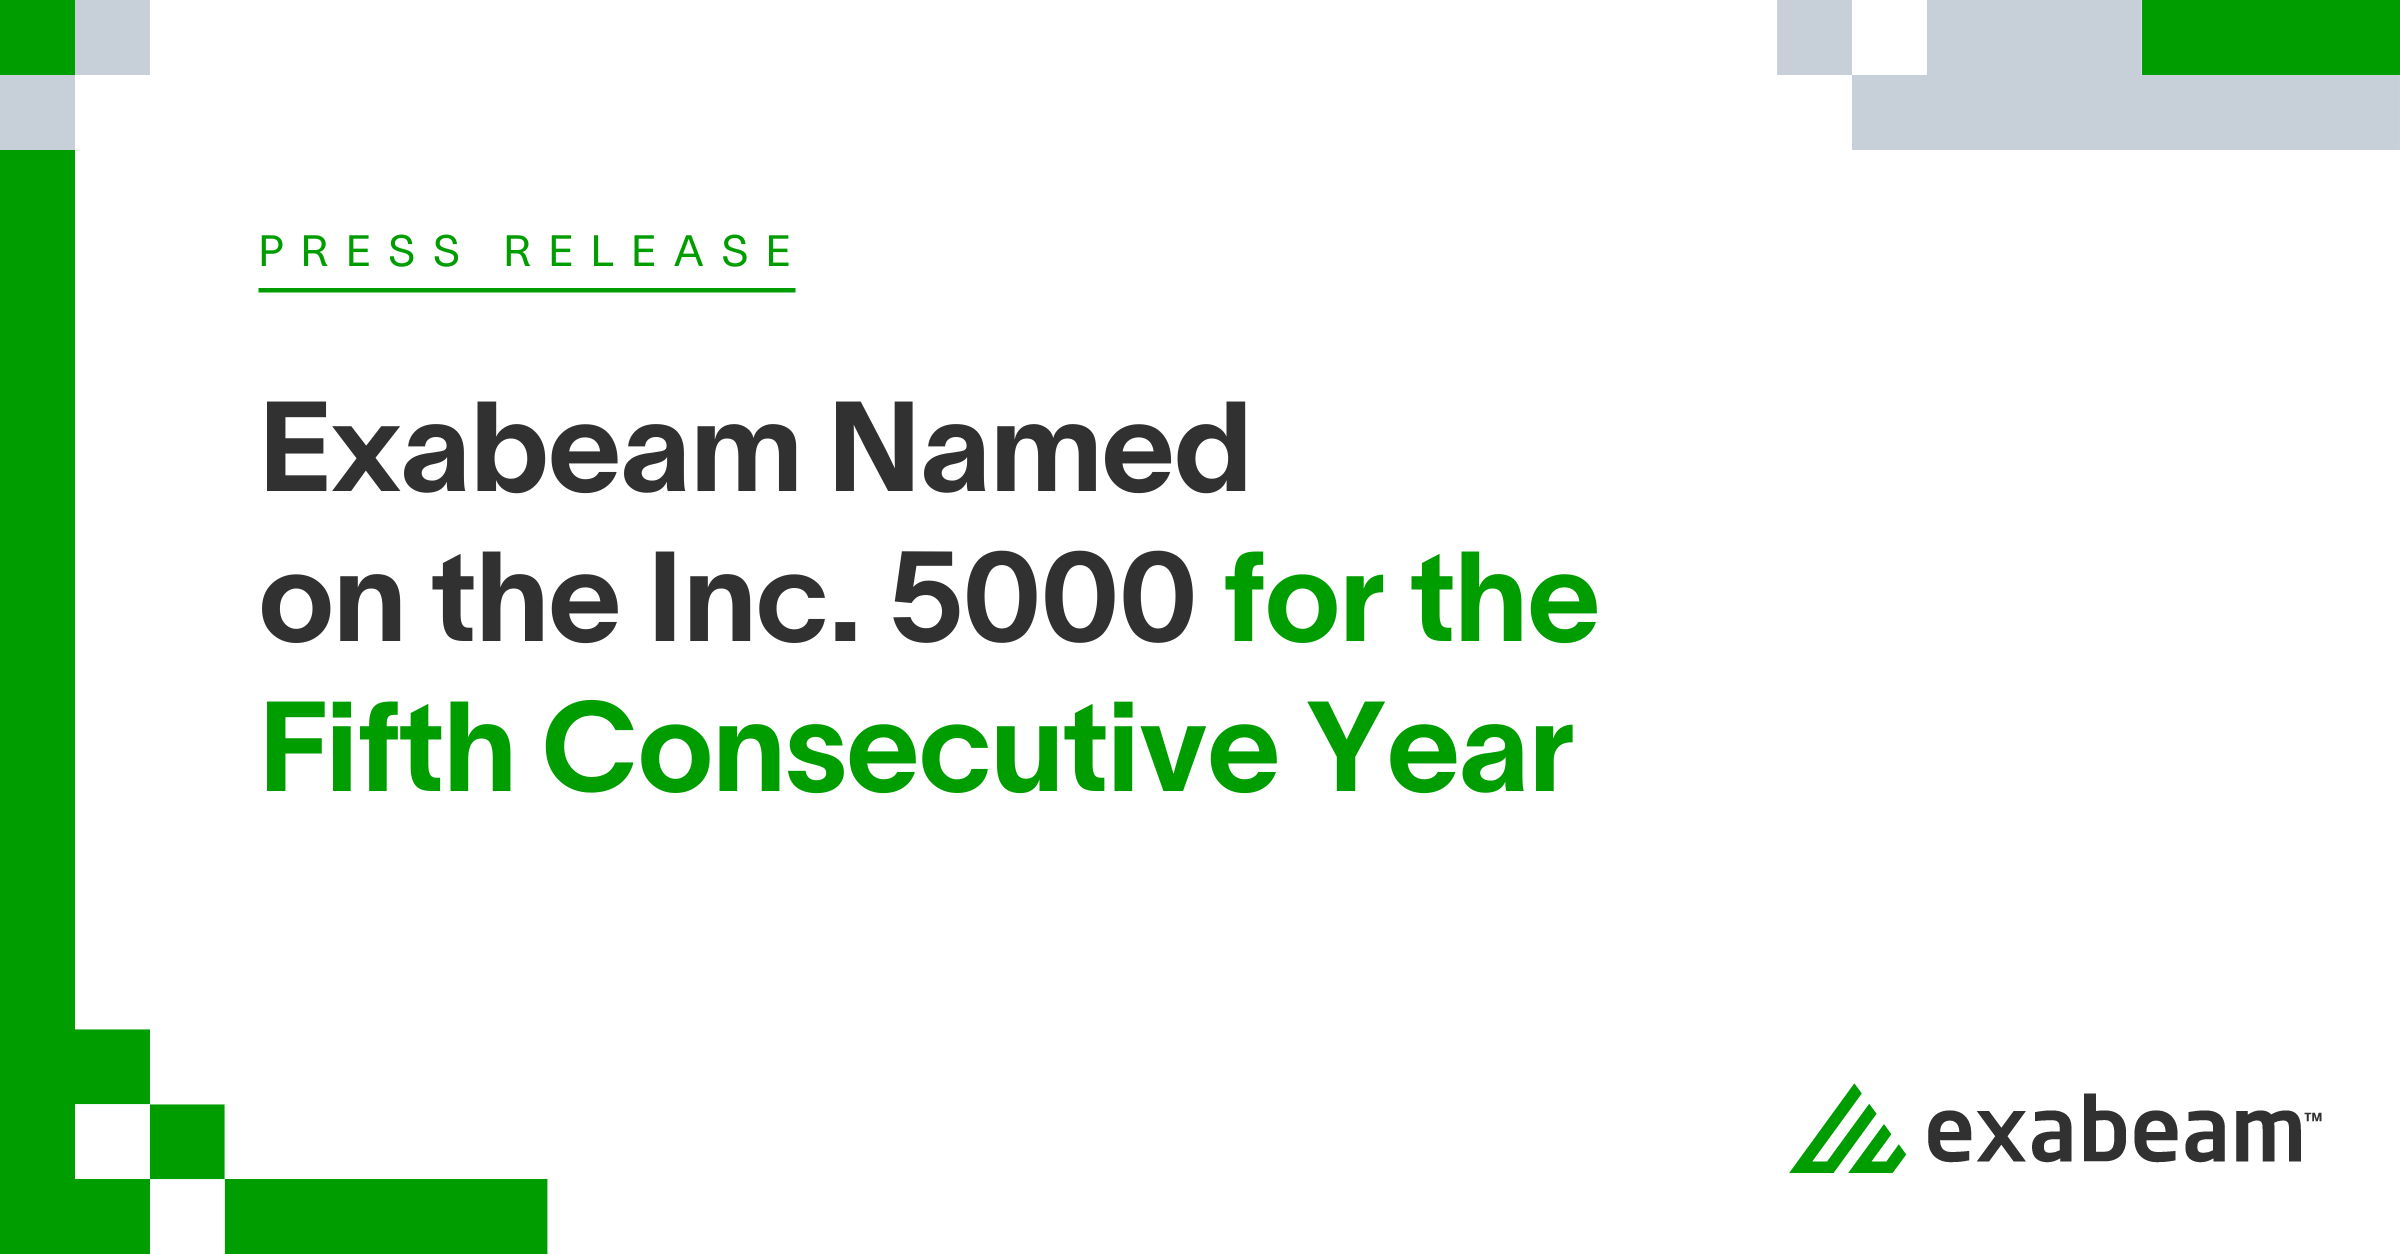 Exabeam Named on the Inc. 5000 for the Fifth Consecutive Year